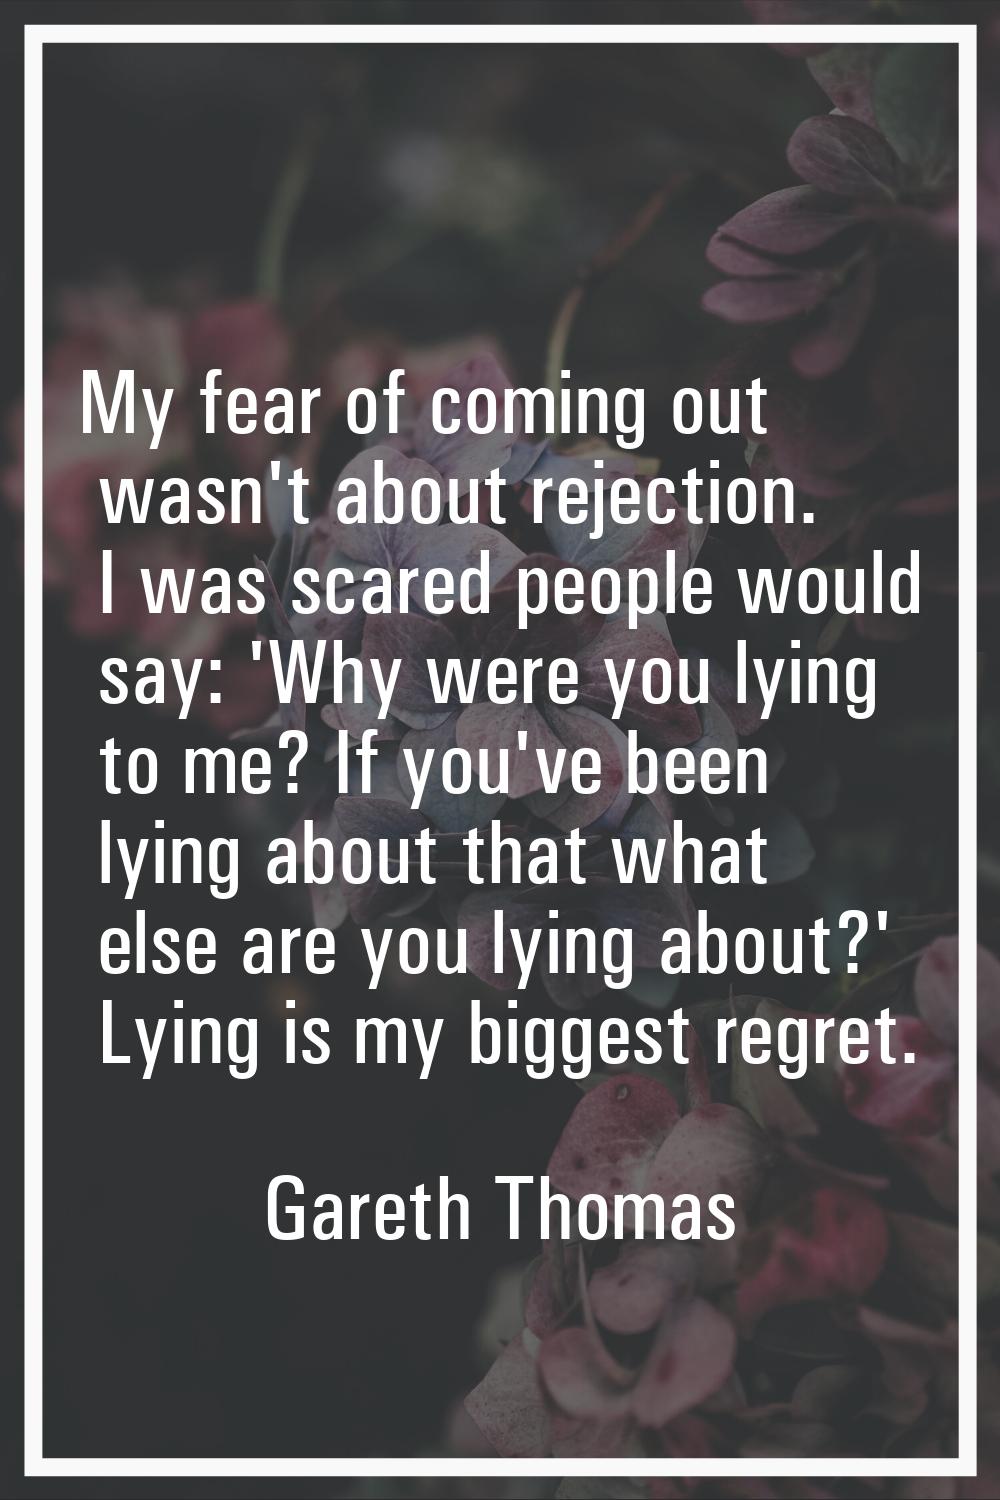 My fear of coming out wasn't about rejection. I was scared people would say: 'Why were you lying to